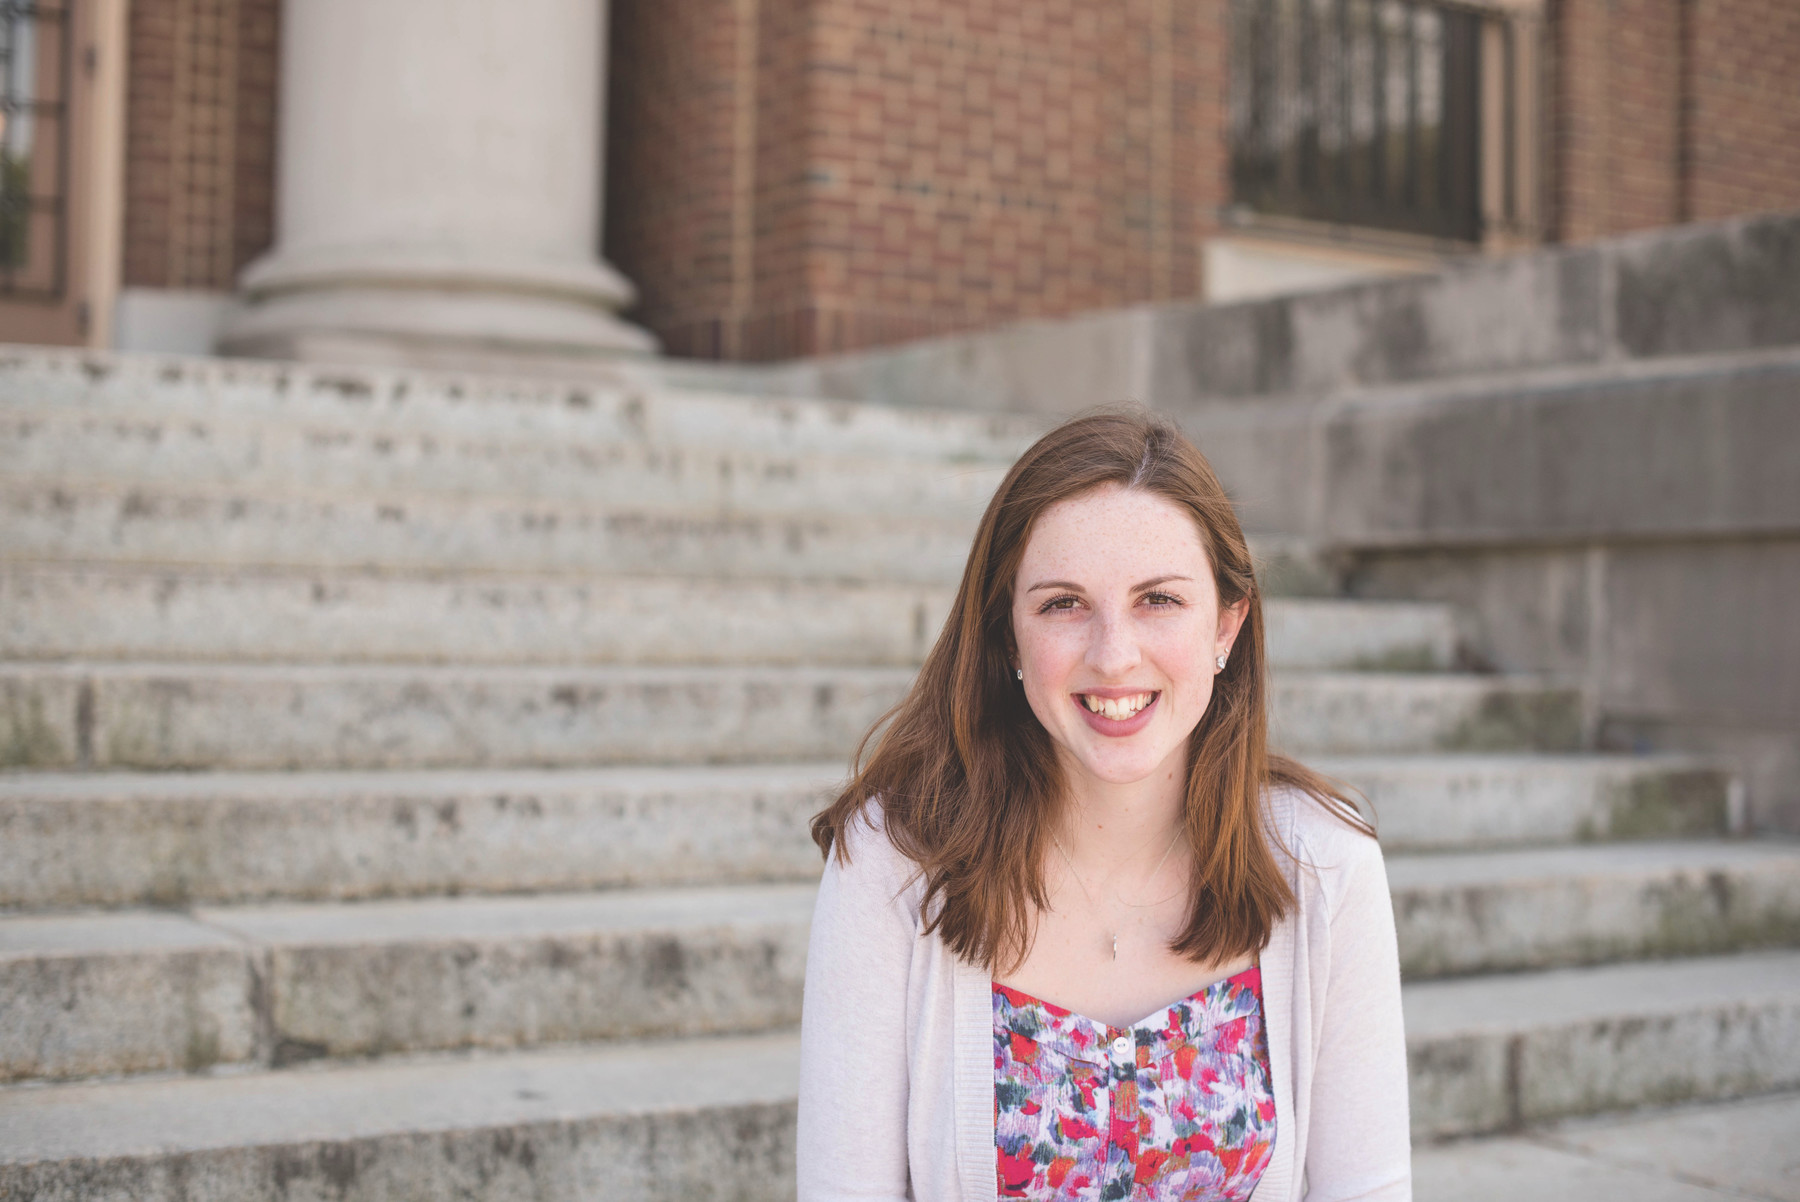 "The School of Social Work has become my home on campus, and it's nice to share that experience with other students," said senior Anne Coulomb, who is serving her second appointment as a Social Work Ambassador.